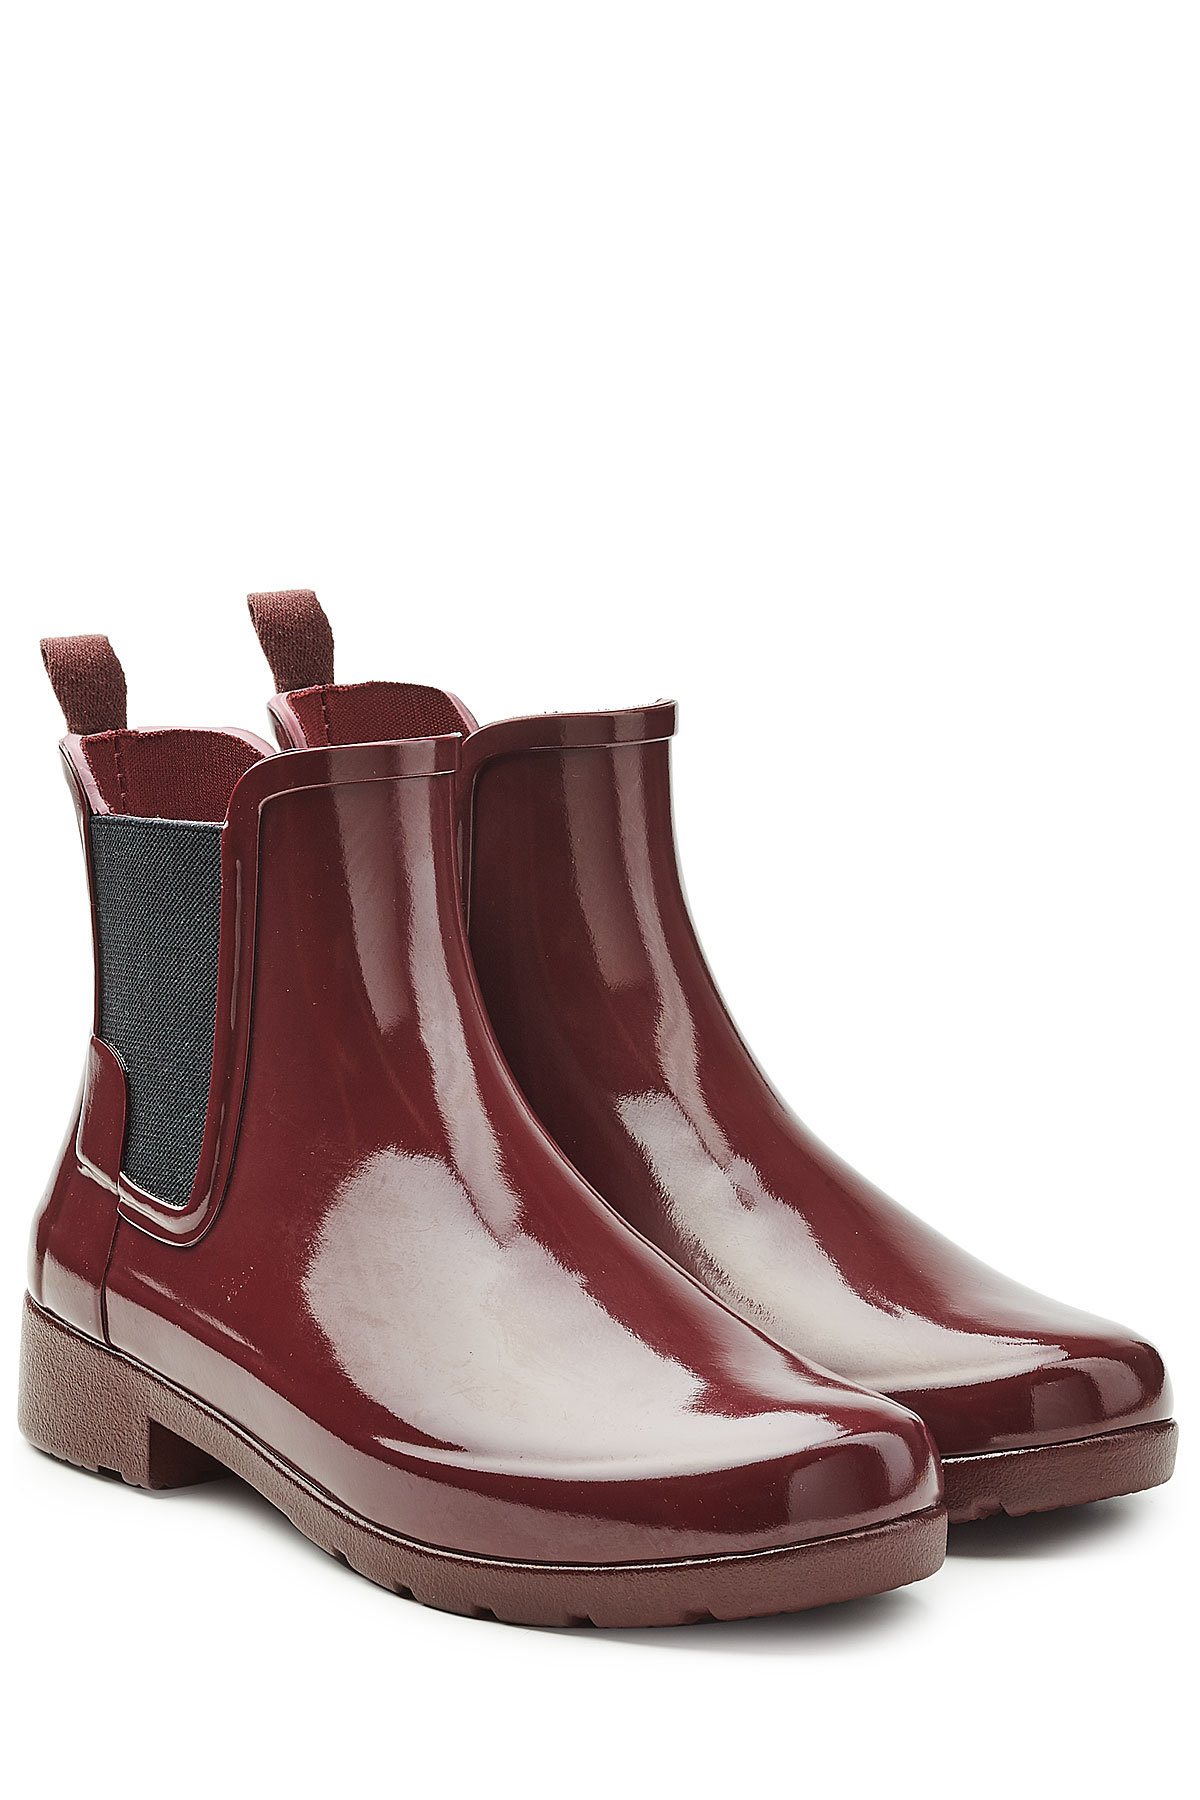 Glossy Rubber Chelsea Boots by Hunter